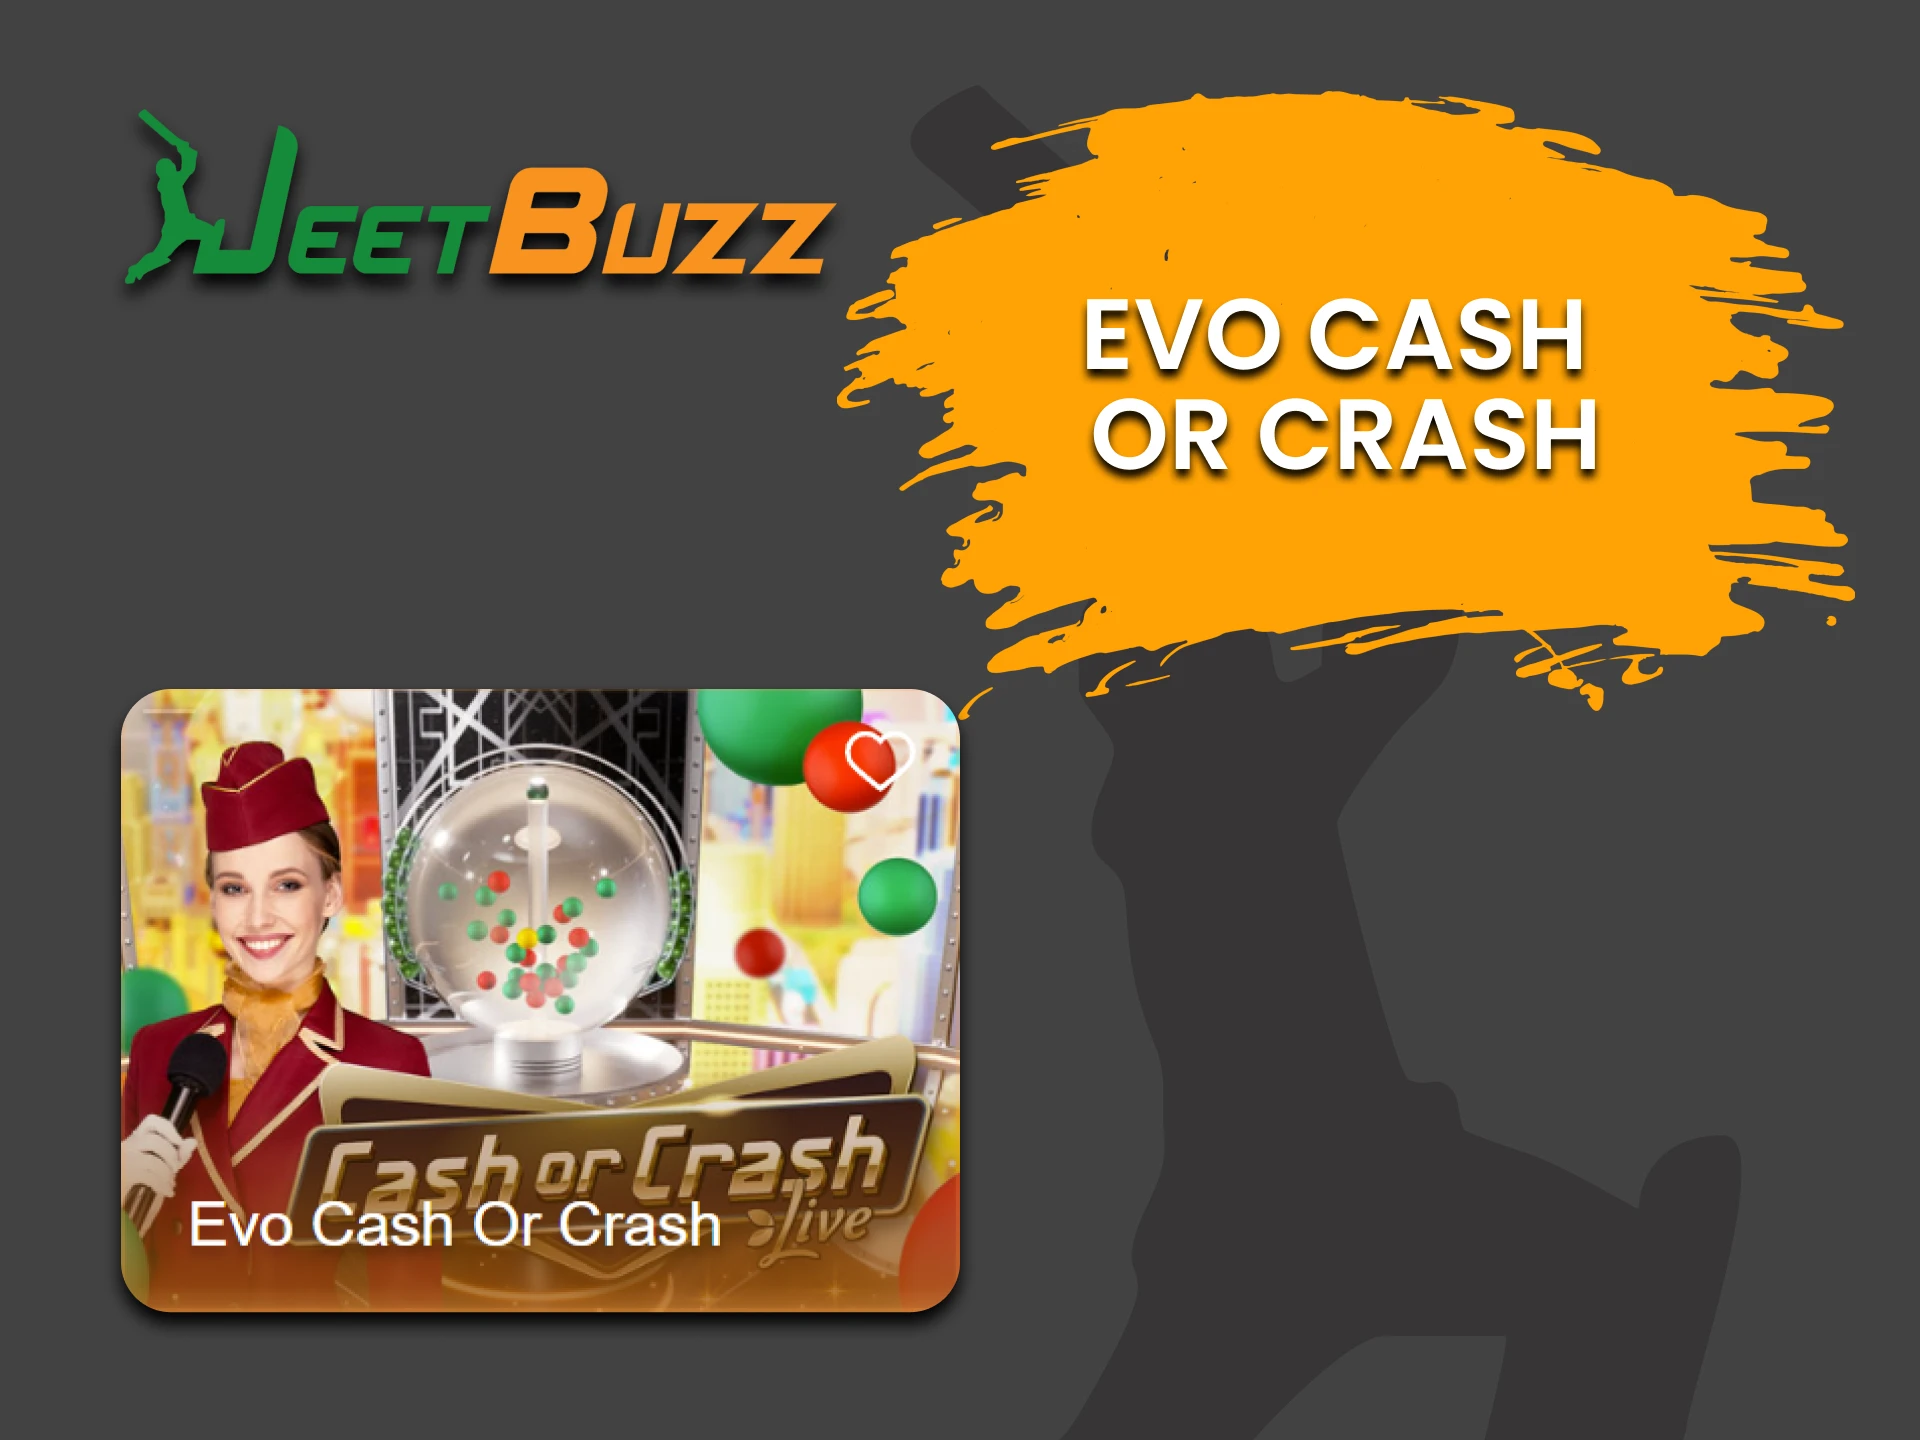 To play Jeetbuzz's Game Show, select "Evo Cash or Crash".